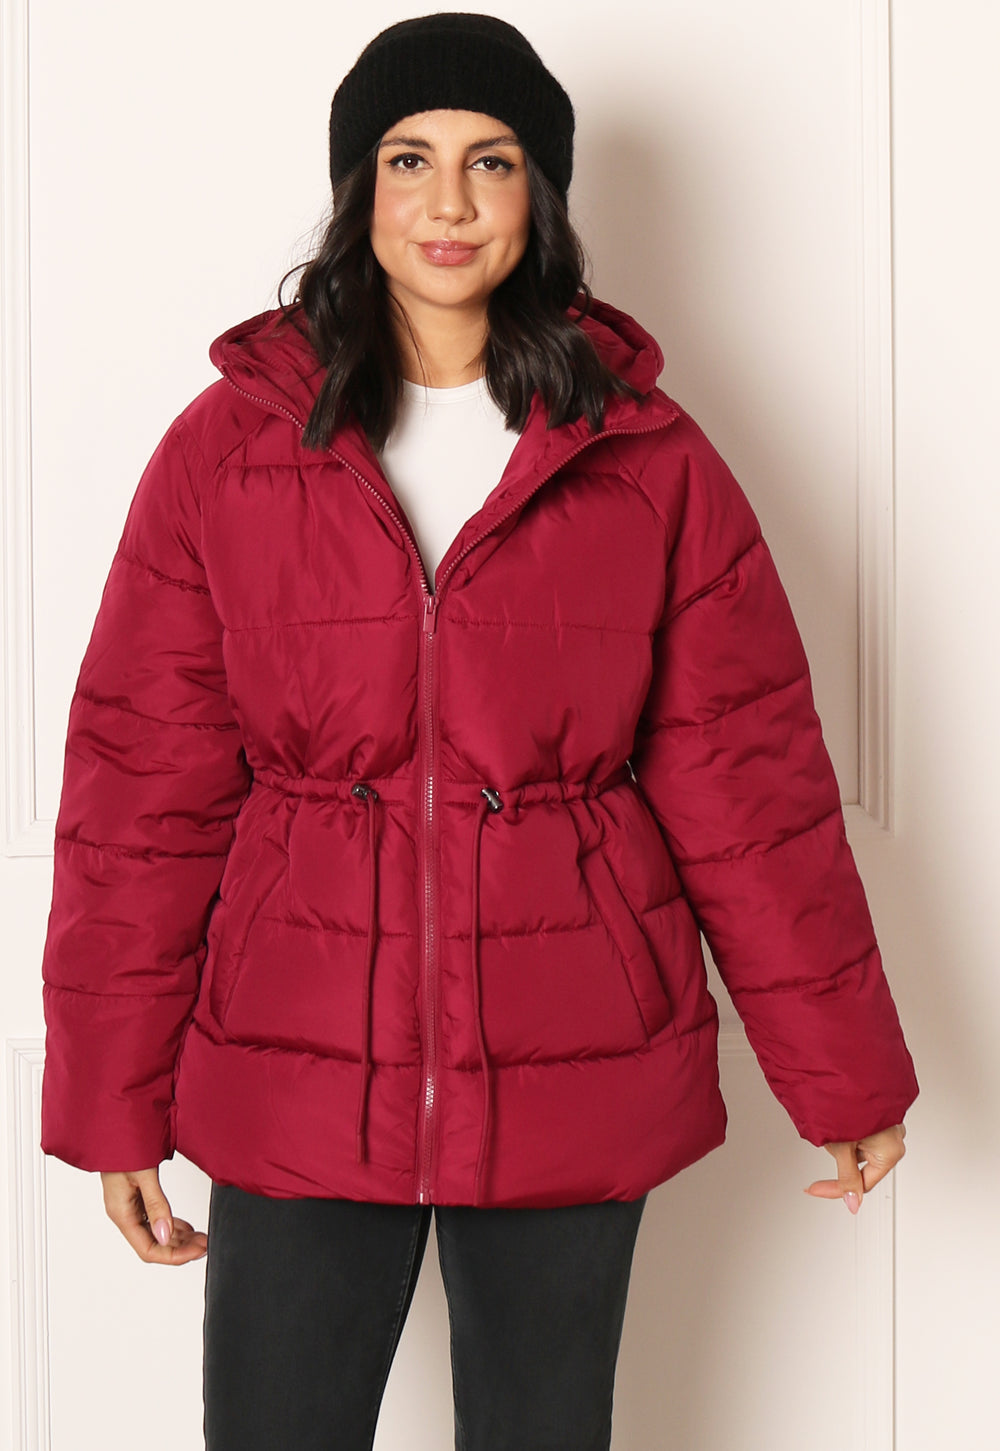 VILA Leana Longline Hooded Puffer Jacket with Tie Waist in Burgundy Red - One Nation Clothing